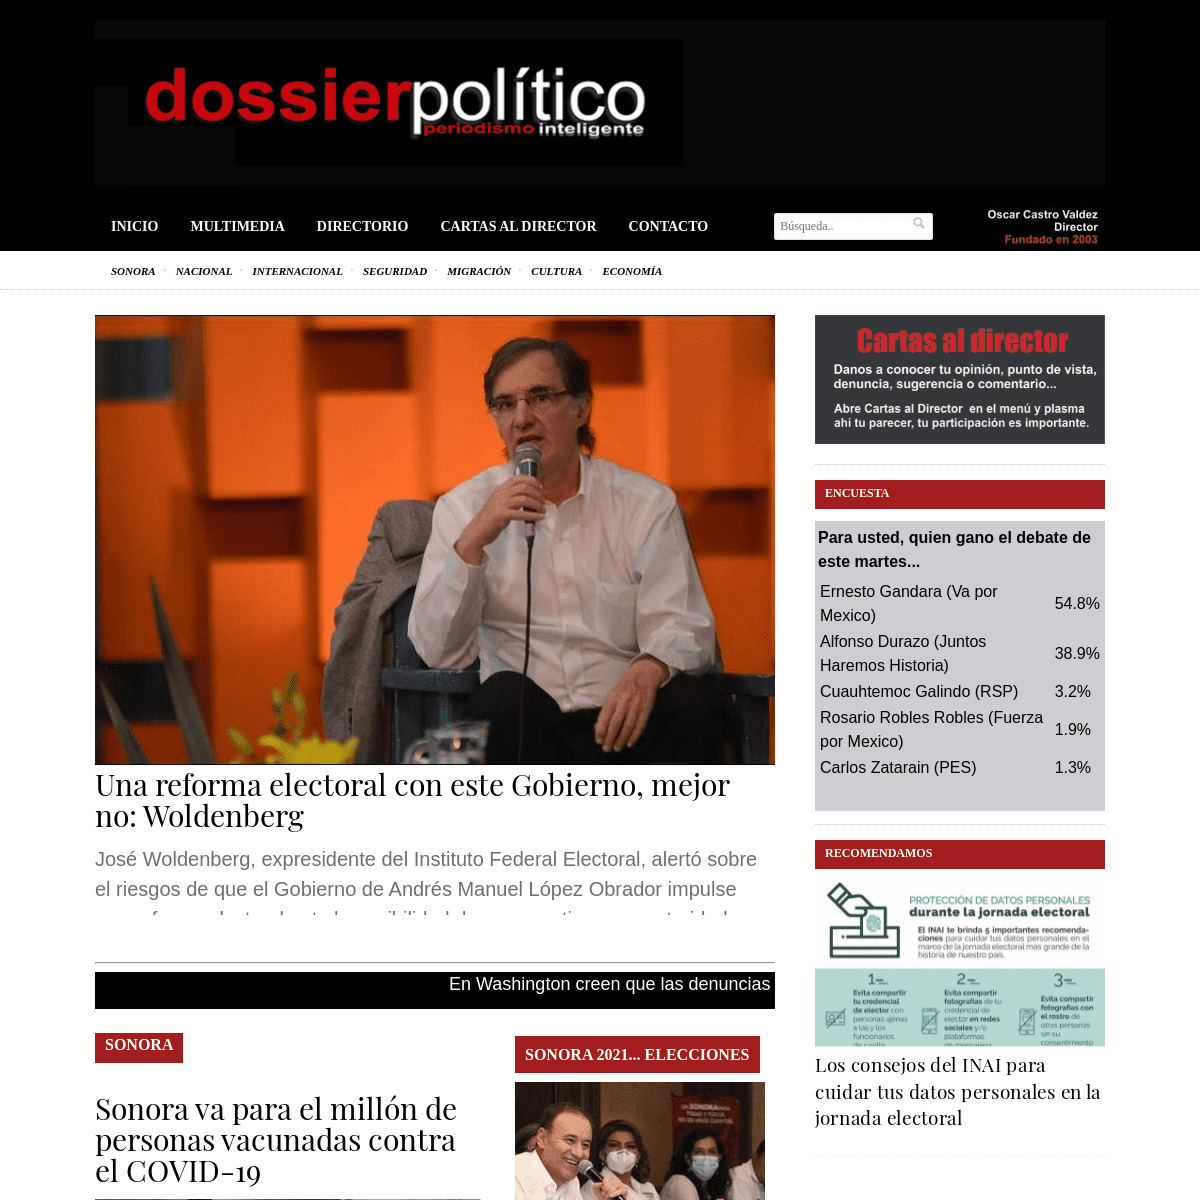 A complete backup of https://dossierpolitico.com